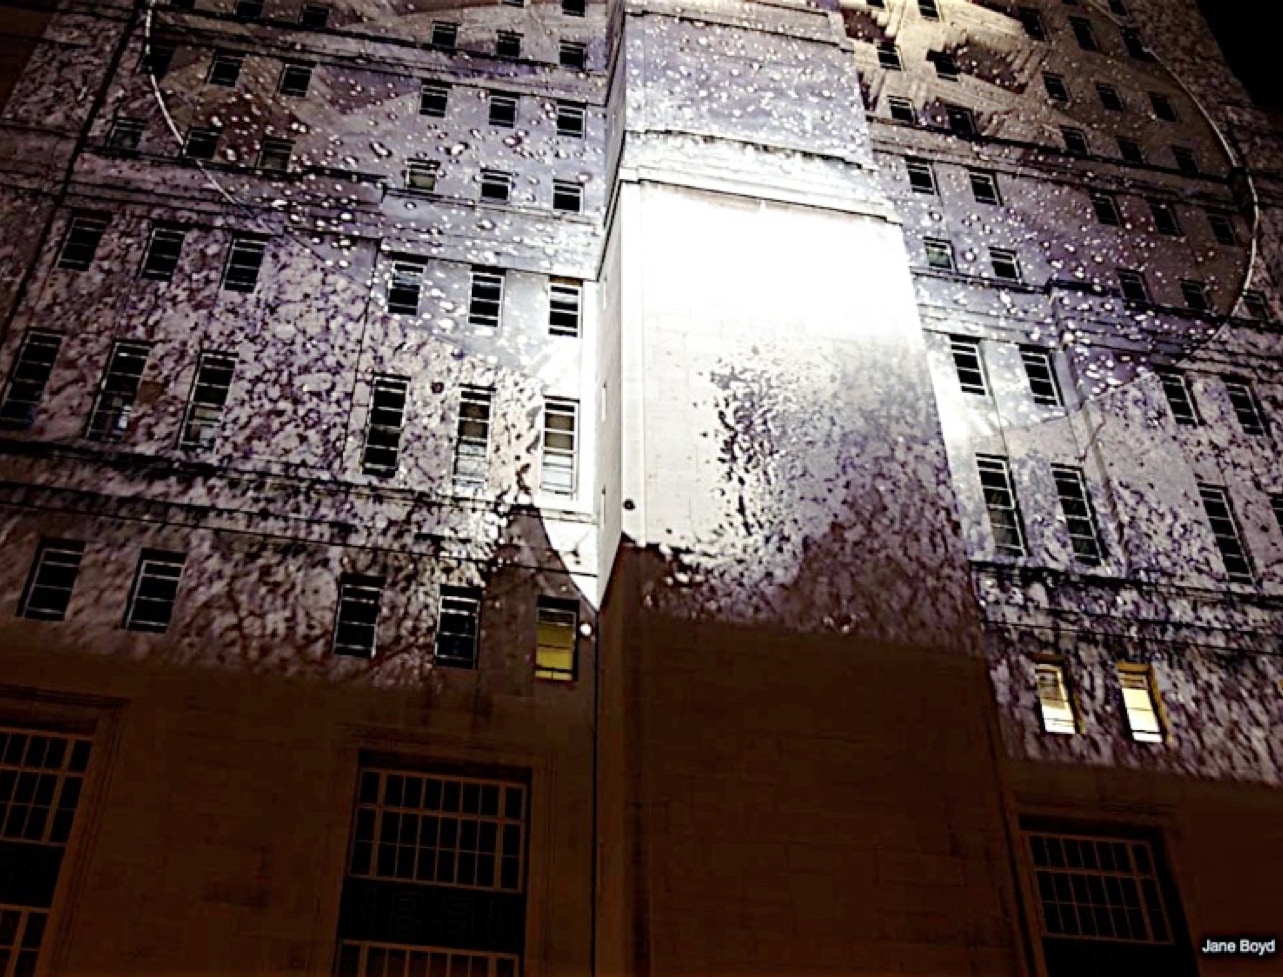 Concrete Liasions 2006 by Jane Boyd a projection on Senate House Tower, Malet Street, London in December of that year during the longest nights